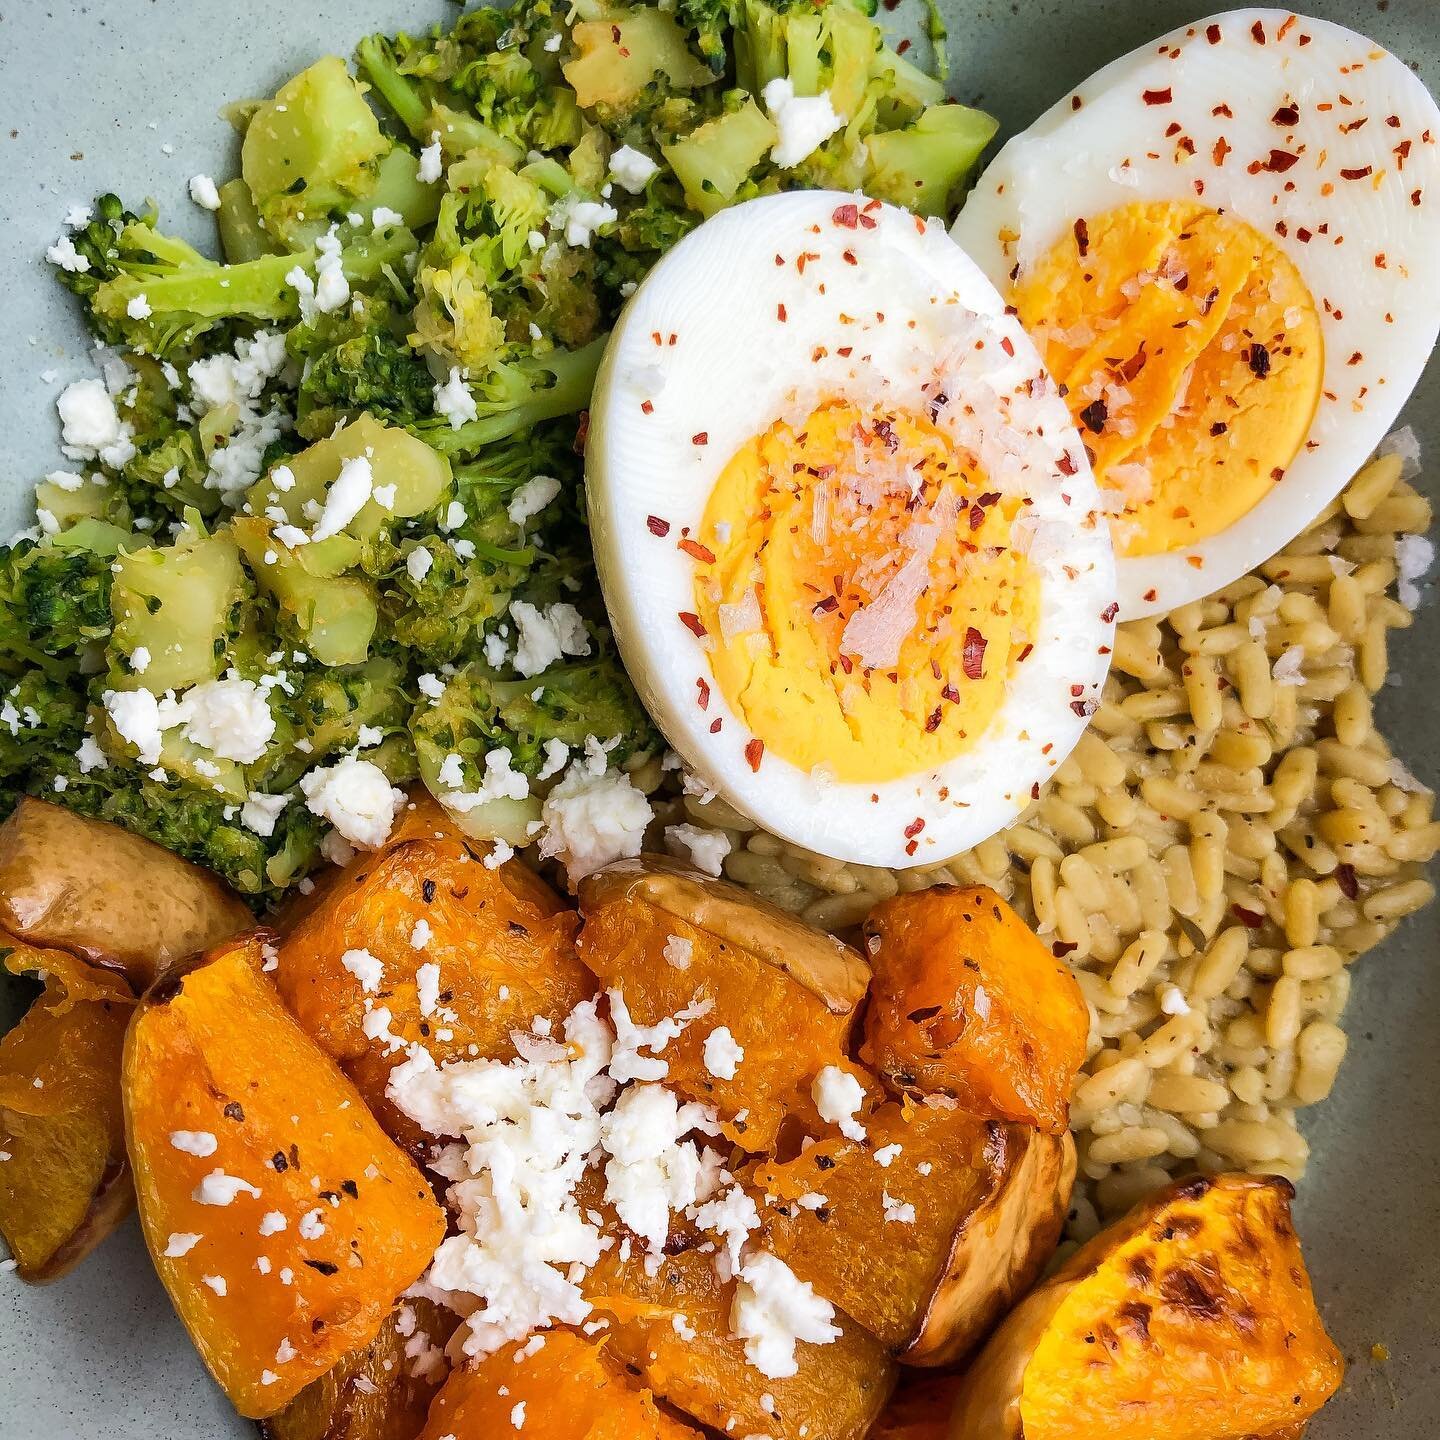 Keeping it colorful today for lunch&mdash;air fried butternut squash with garlic and herb @rightrice , chopped &amp; steamed broccoli, hard boiled egg, and feta 😍

There&rsquo;s this common misconception that intuitive eating means eating a ton of h